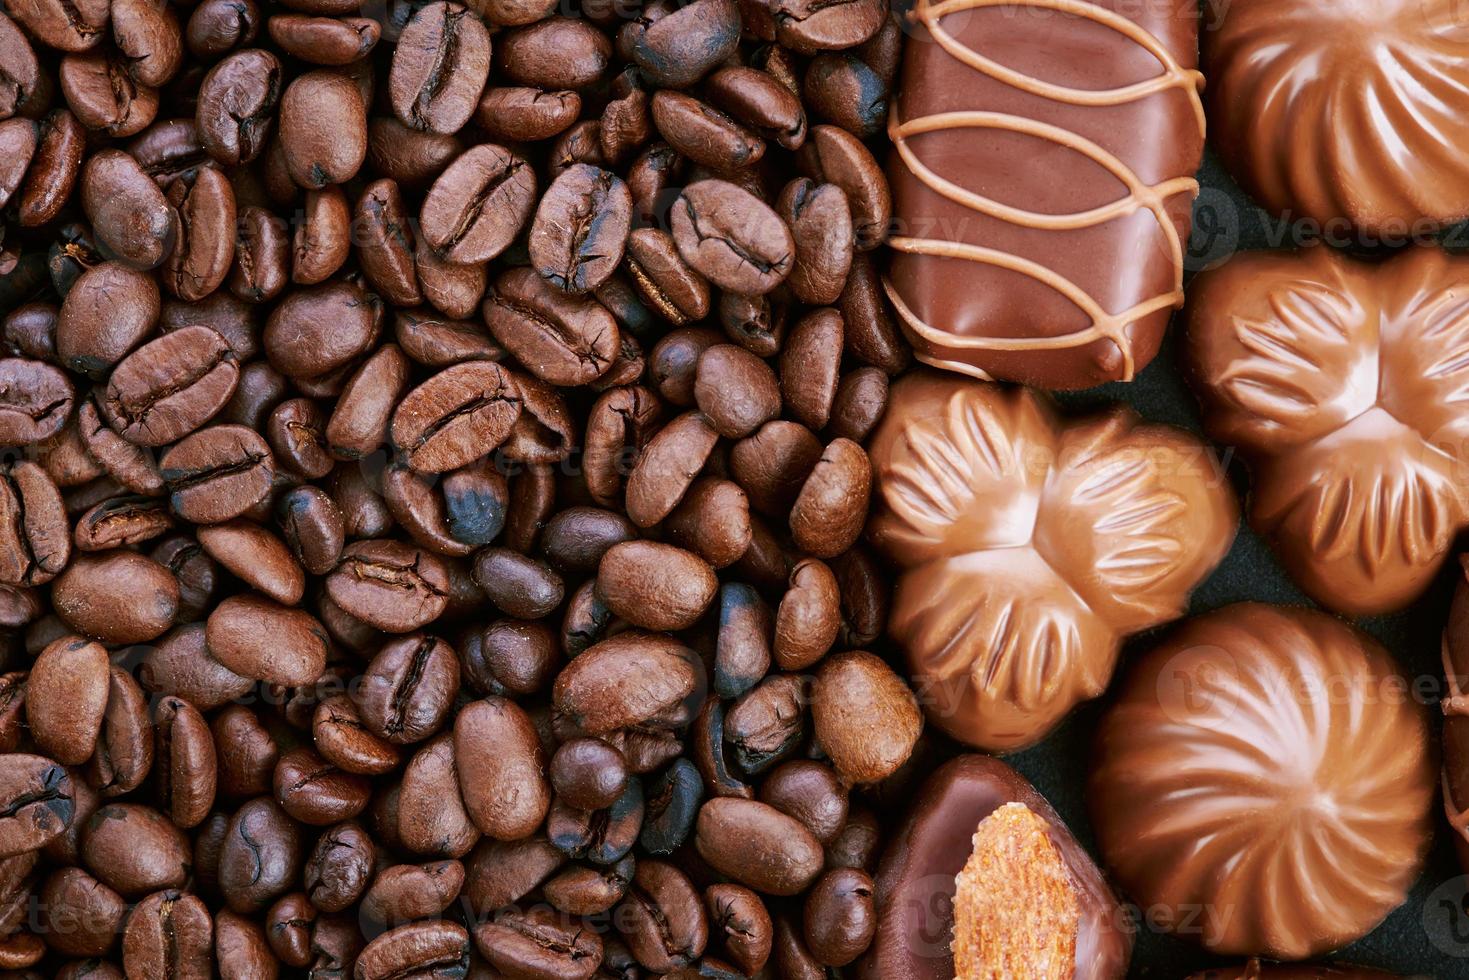 Chocolate candies and coffee beans photo